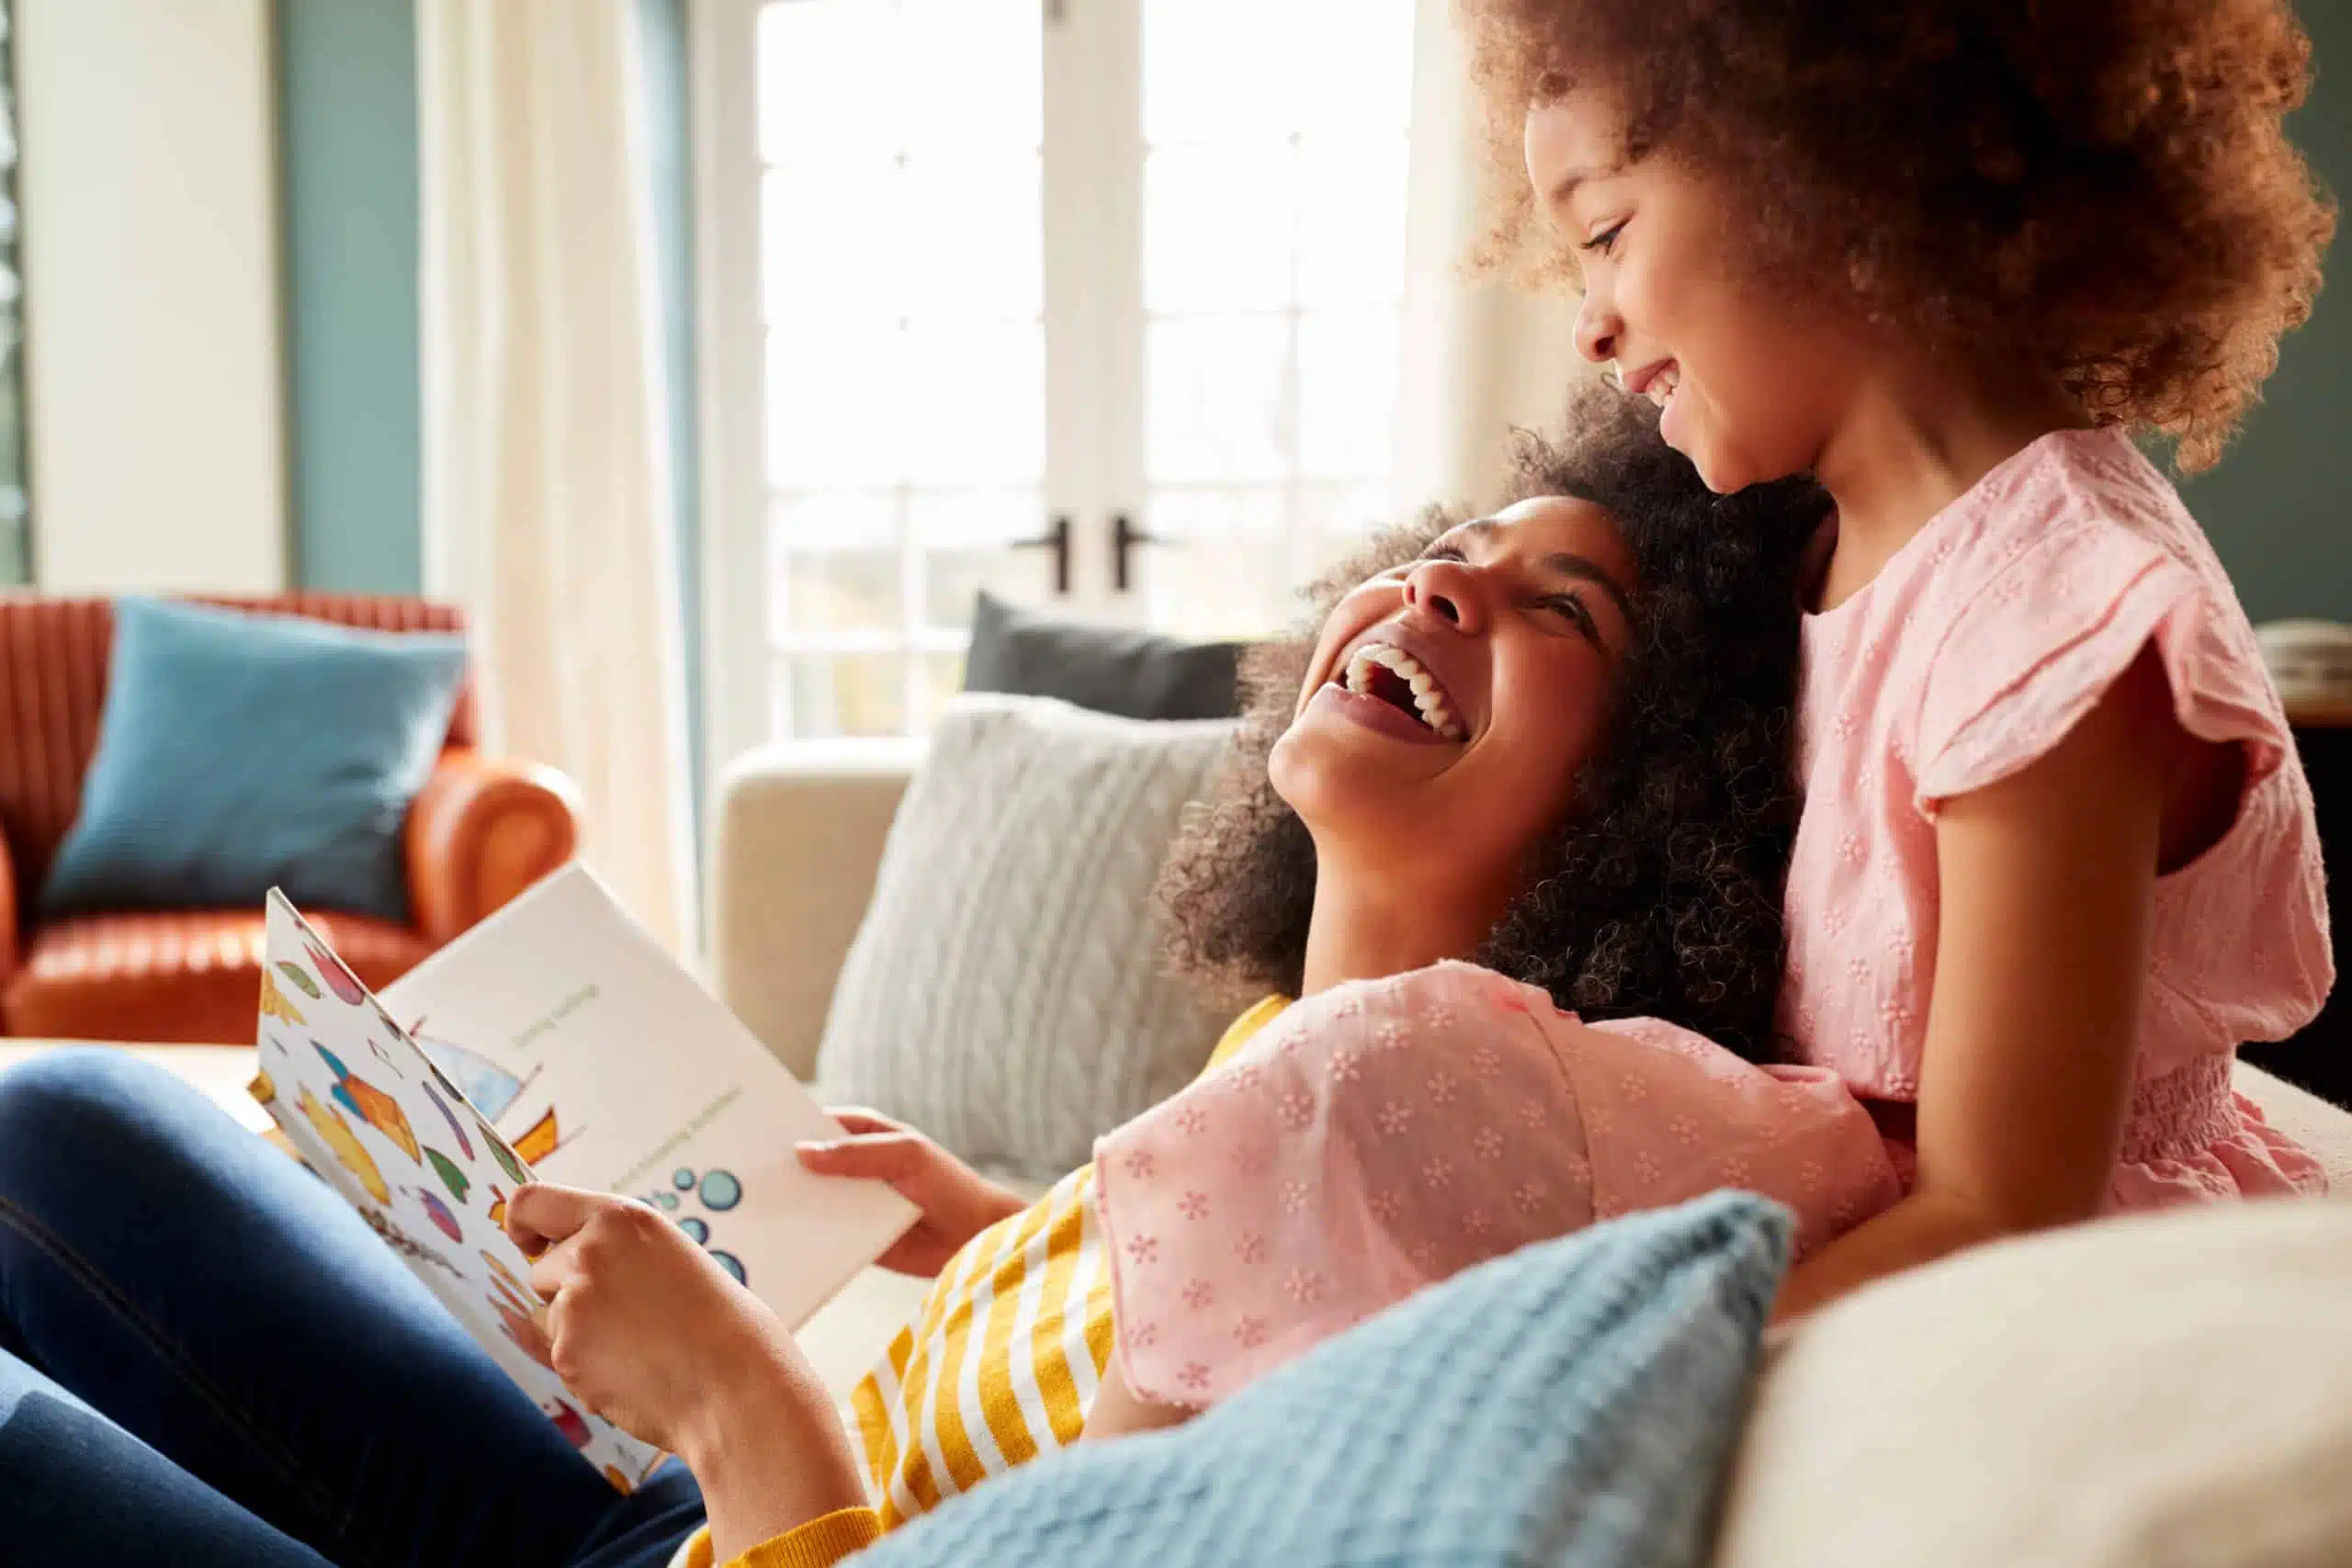 mother and daughter relaxing and reading a book together in a sofa.